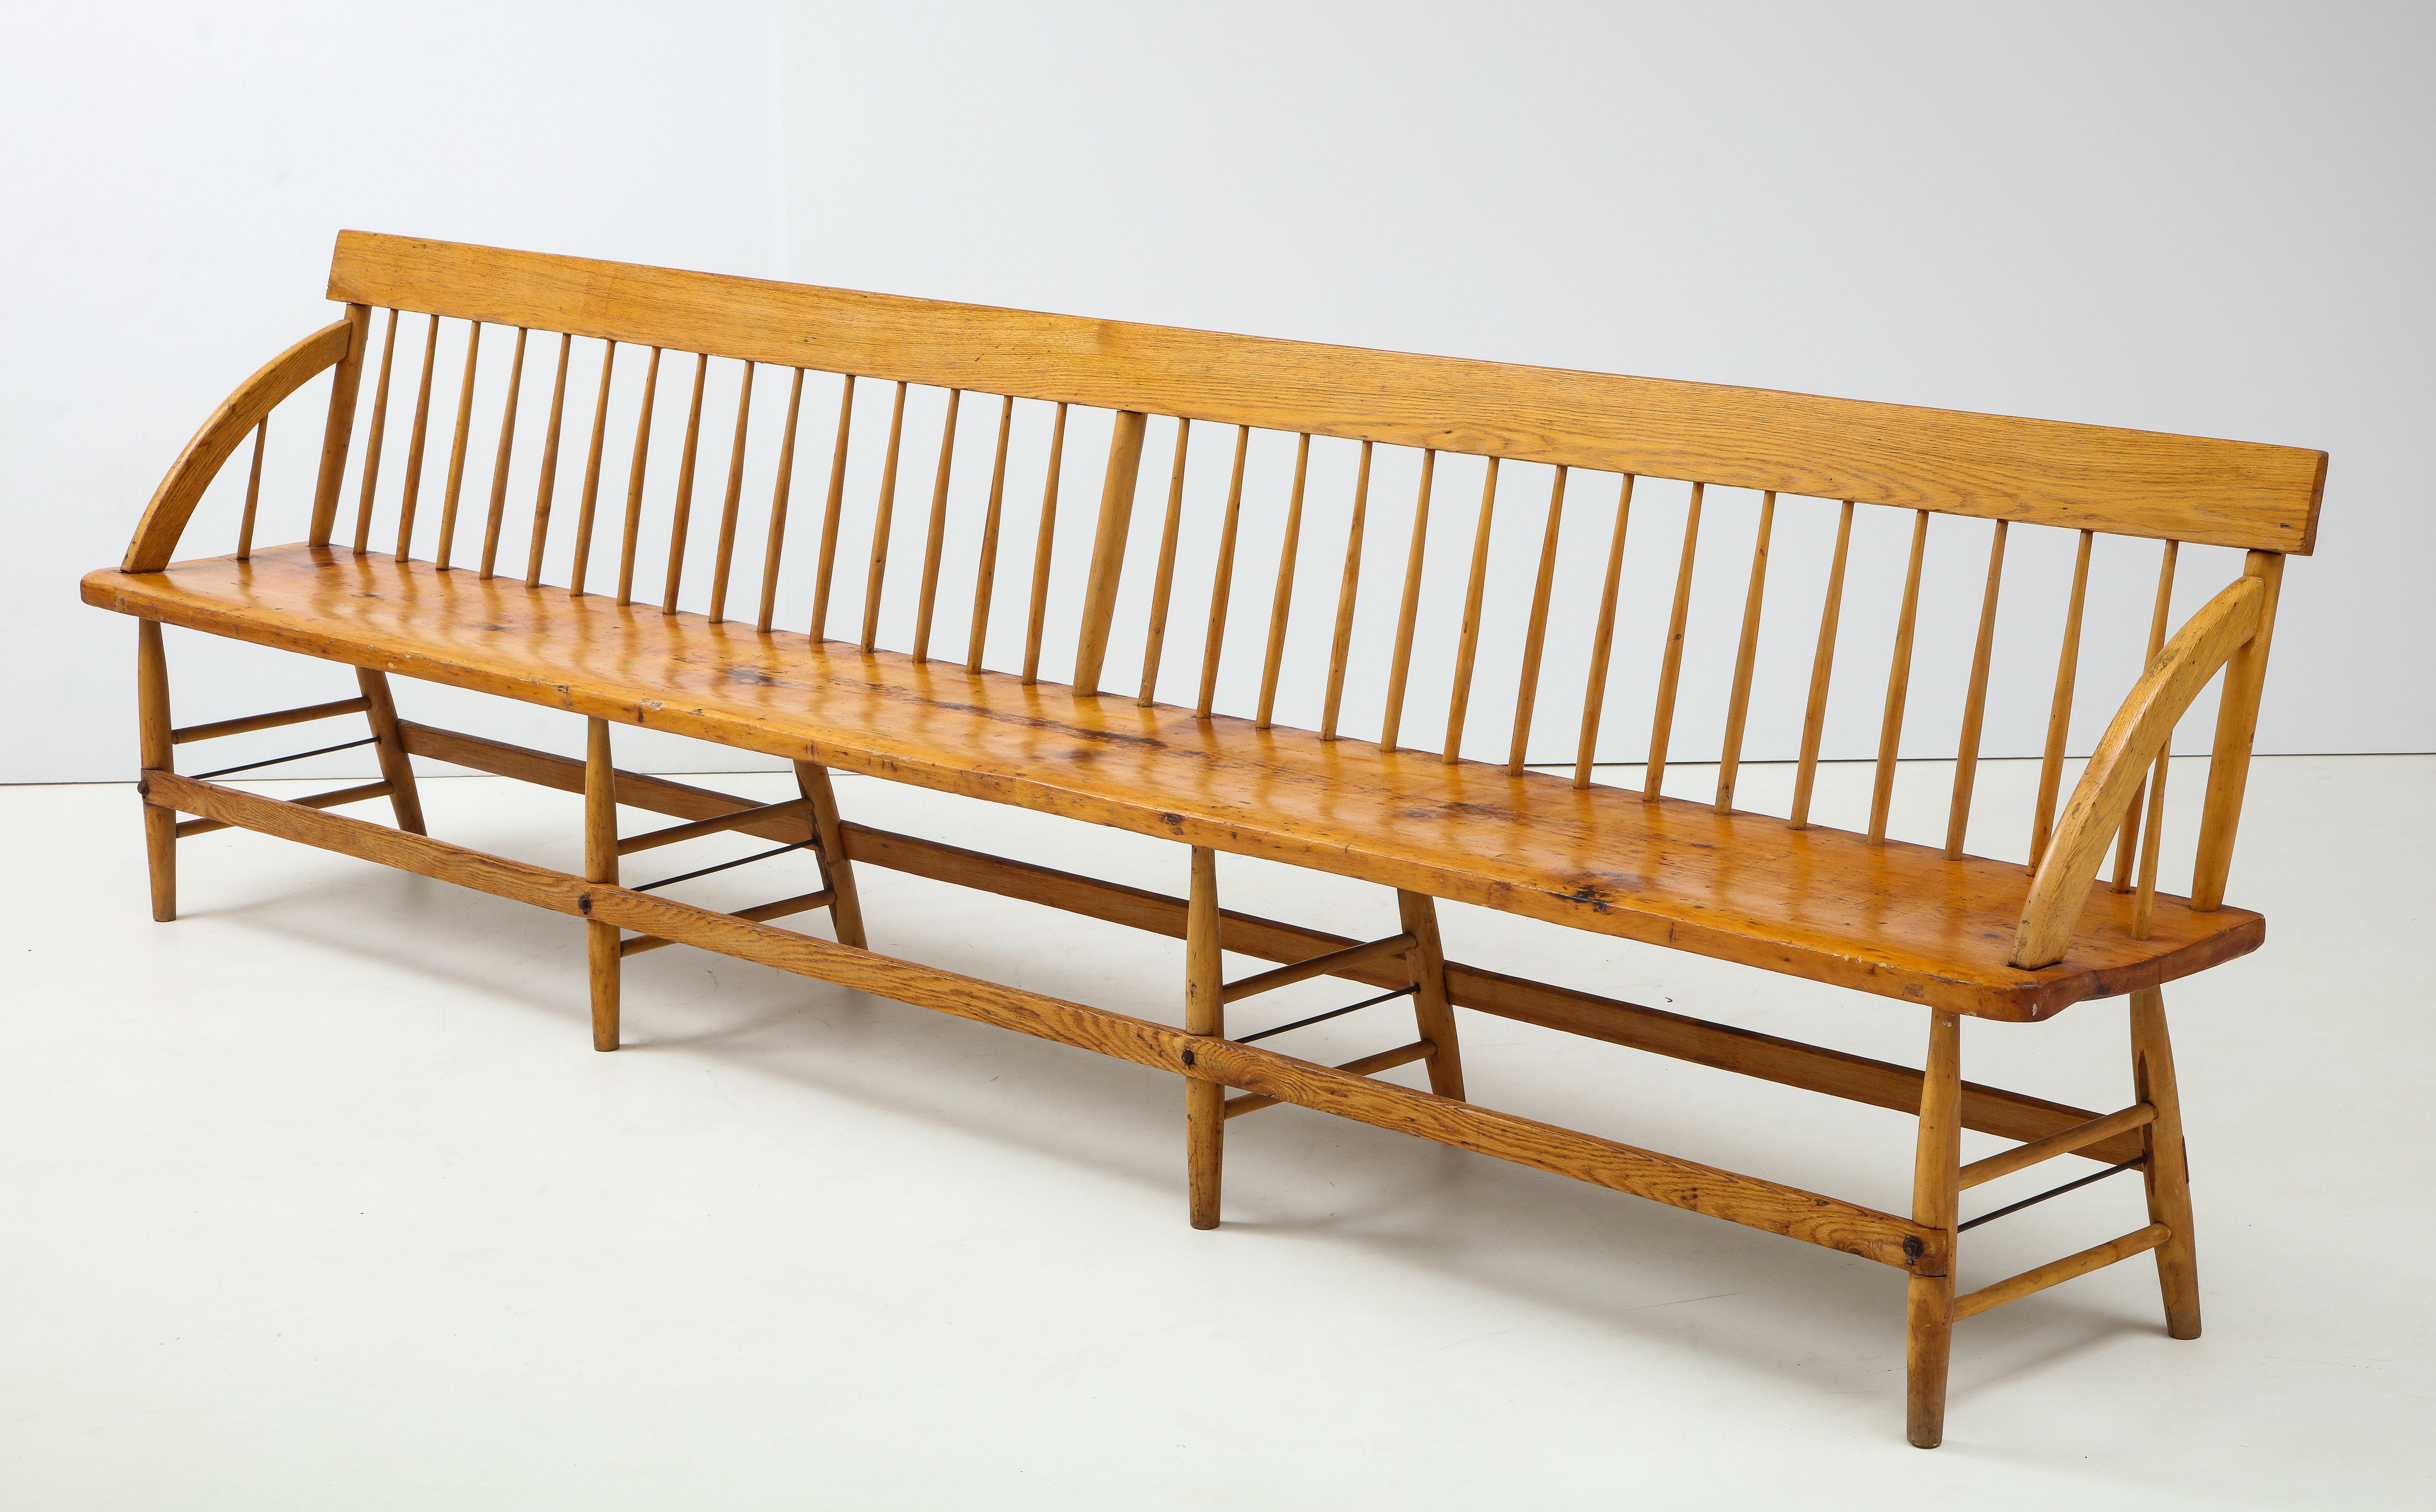 Shaker Exceptional 19th C. Hand Made Quaker Meeting House Bench, New England/Cape Cod